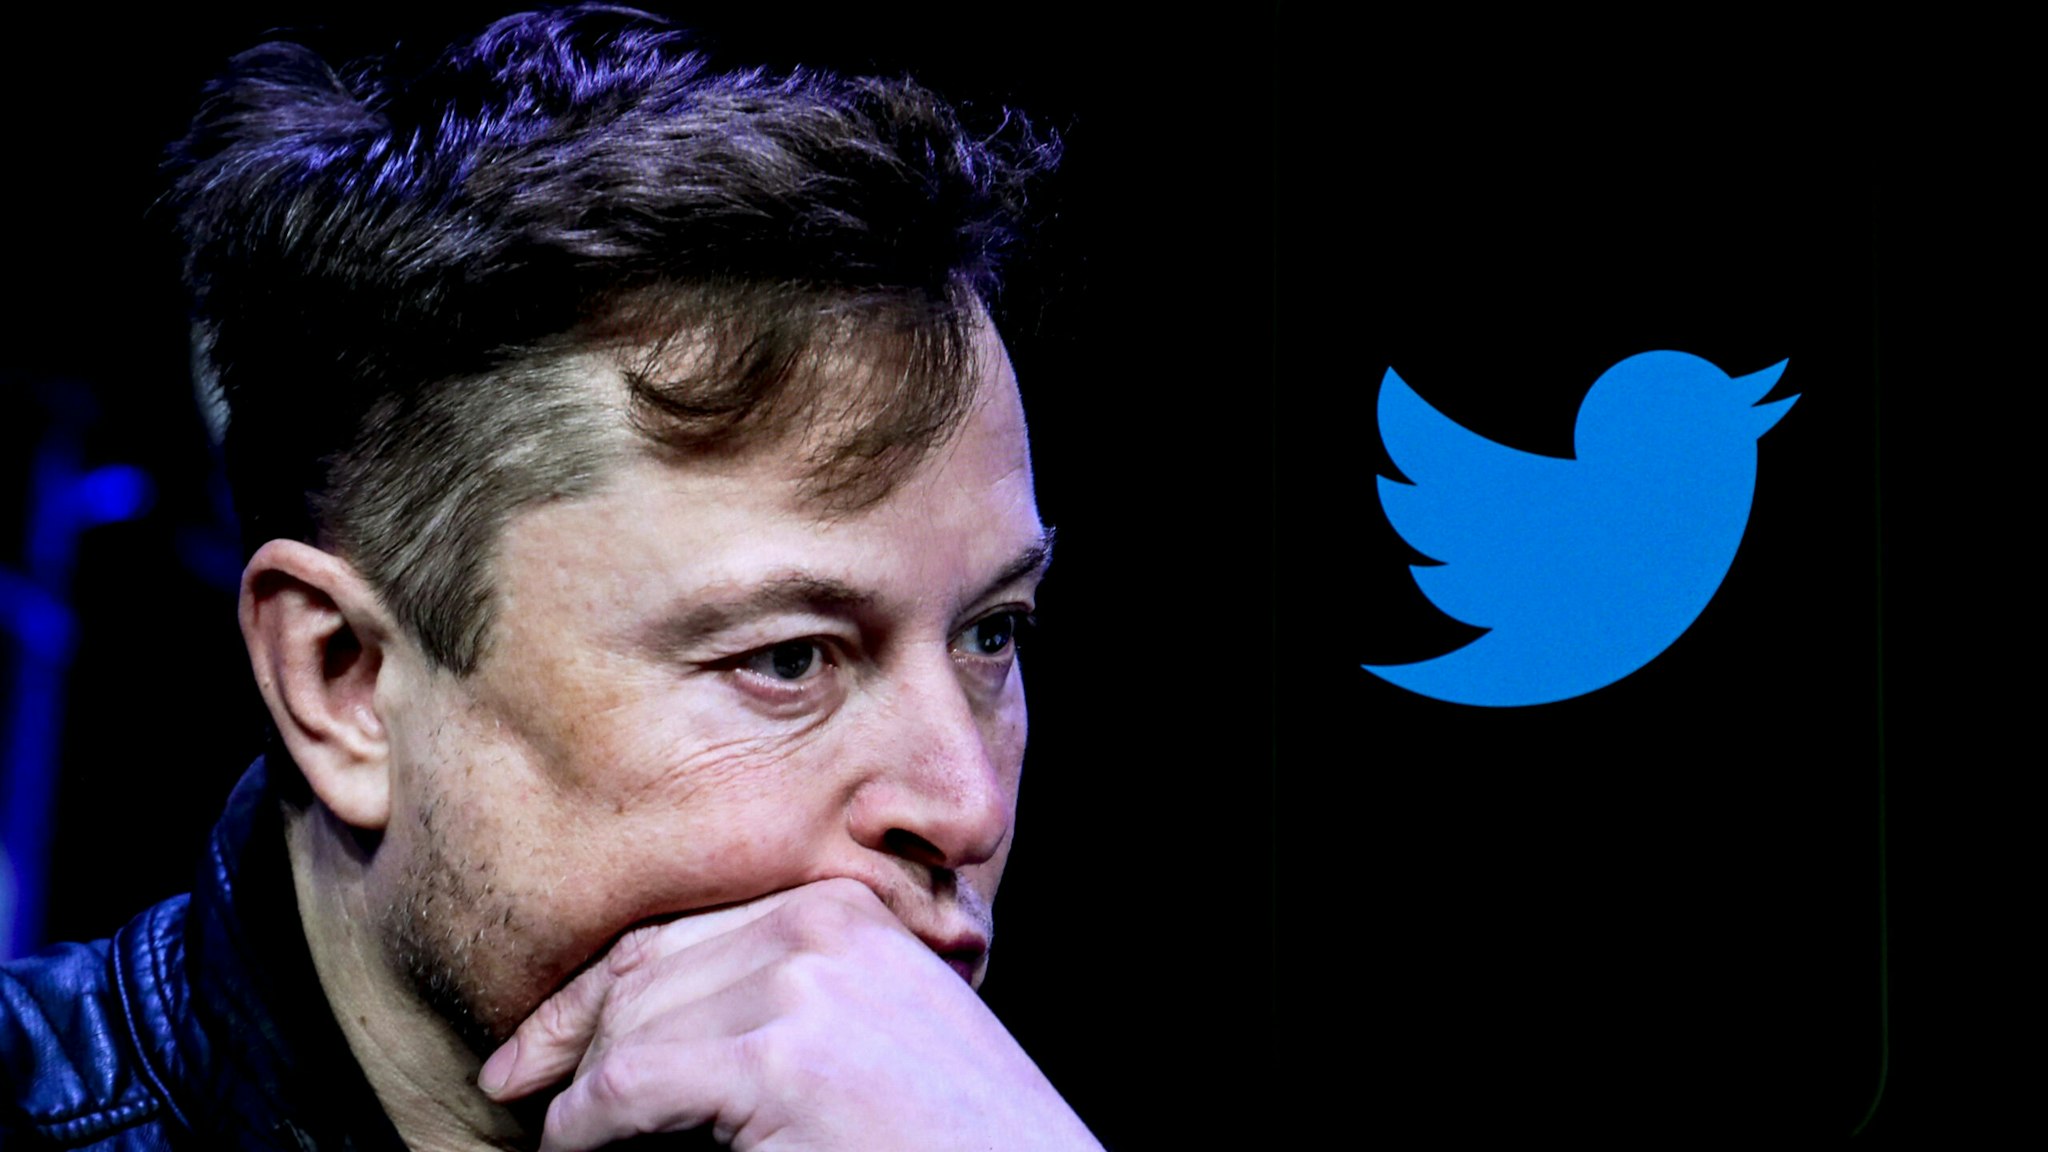 ANKARA, TURKIYE - OCTOBER 06: In this photo illustration, the image of Elon Musk is displayed on a computer screen and the logo of twitter on a mobile phone in Ankara, Turkiye on October 06, 2022.